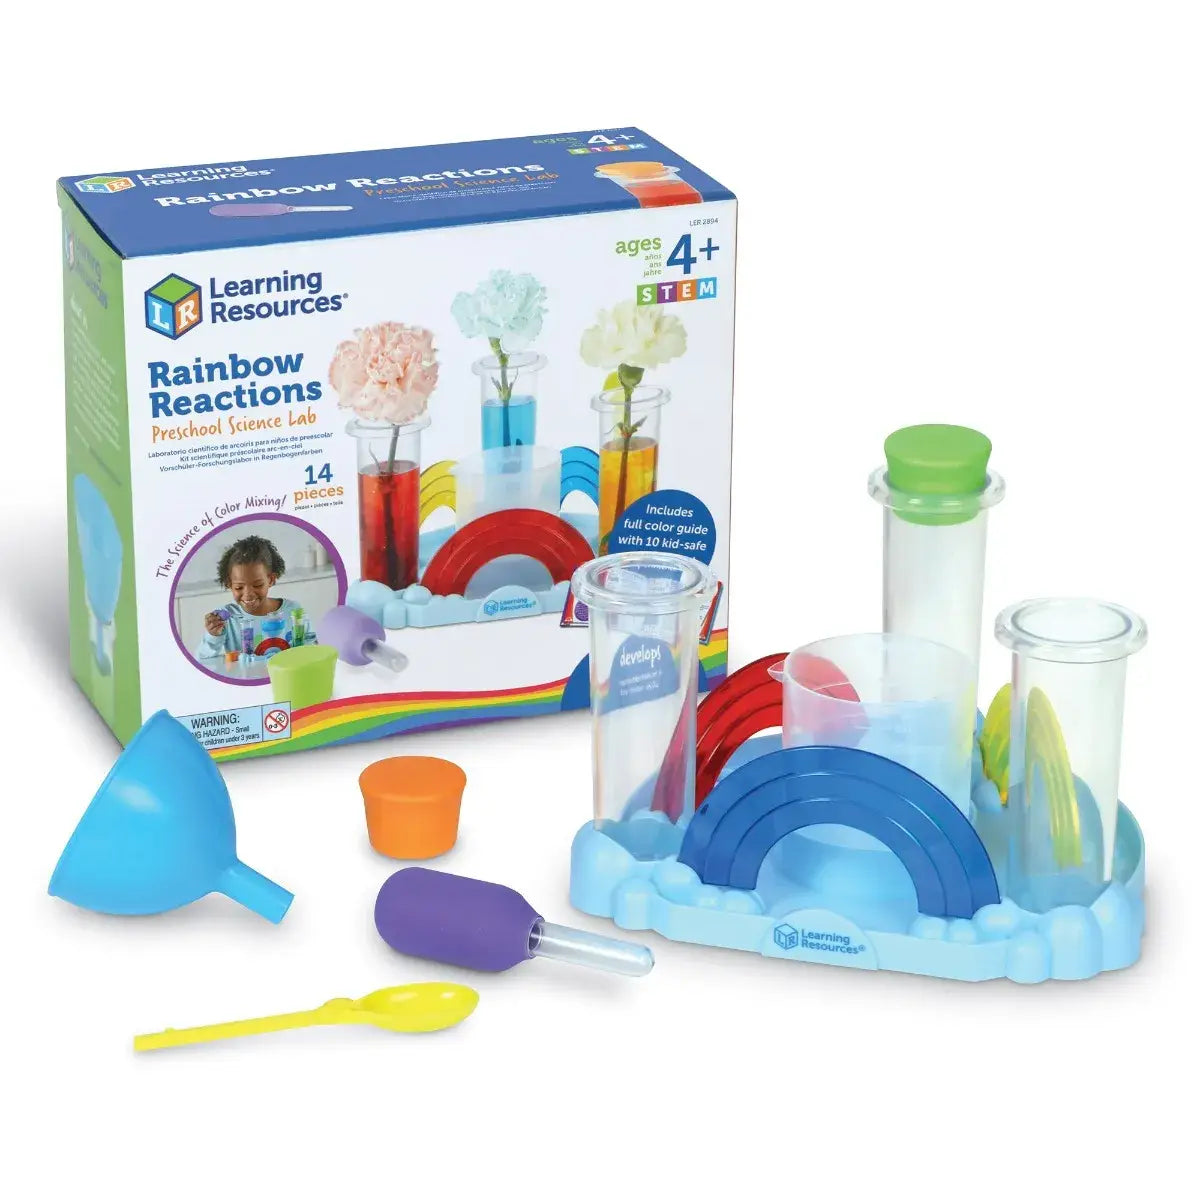 Learning Resources - Rainbow Reactions Preschool Science Lab